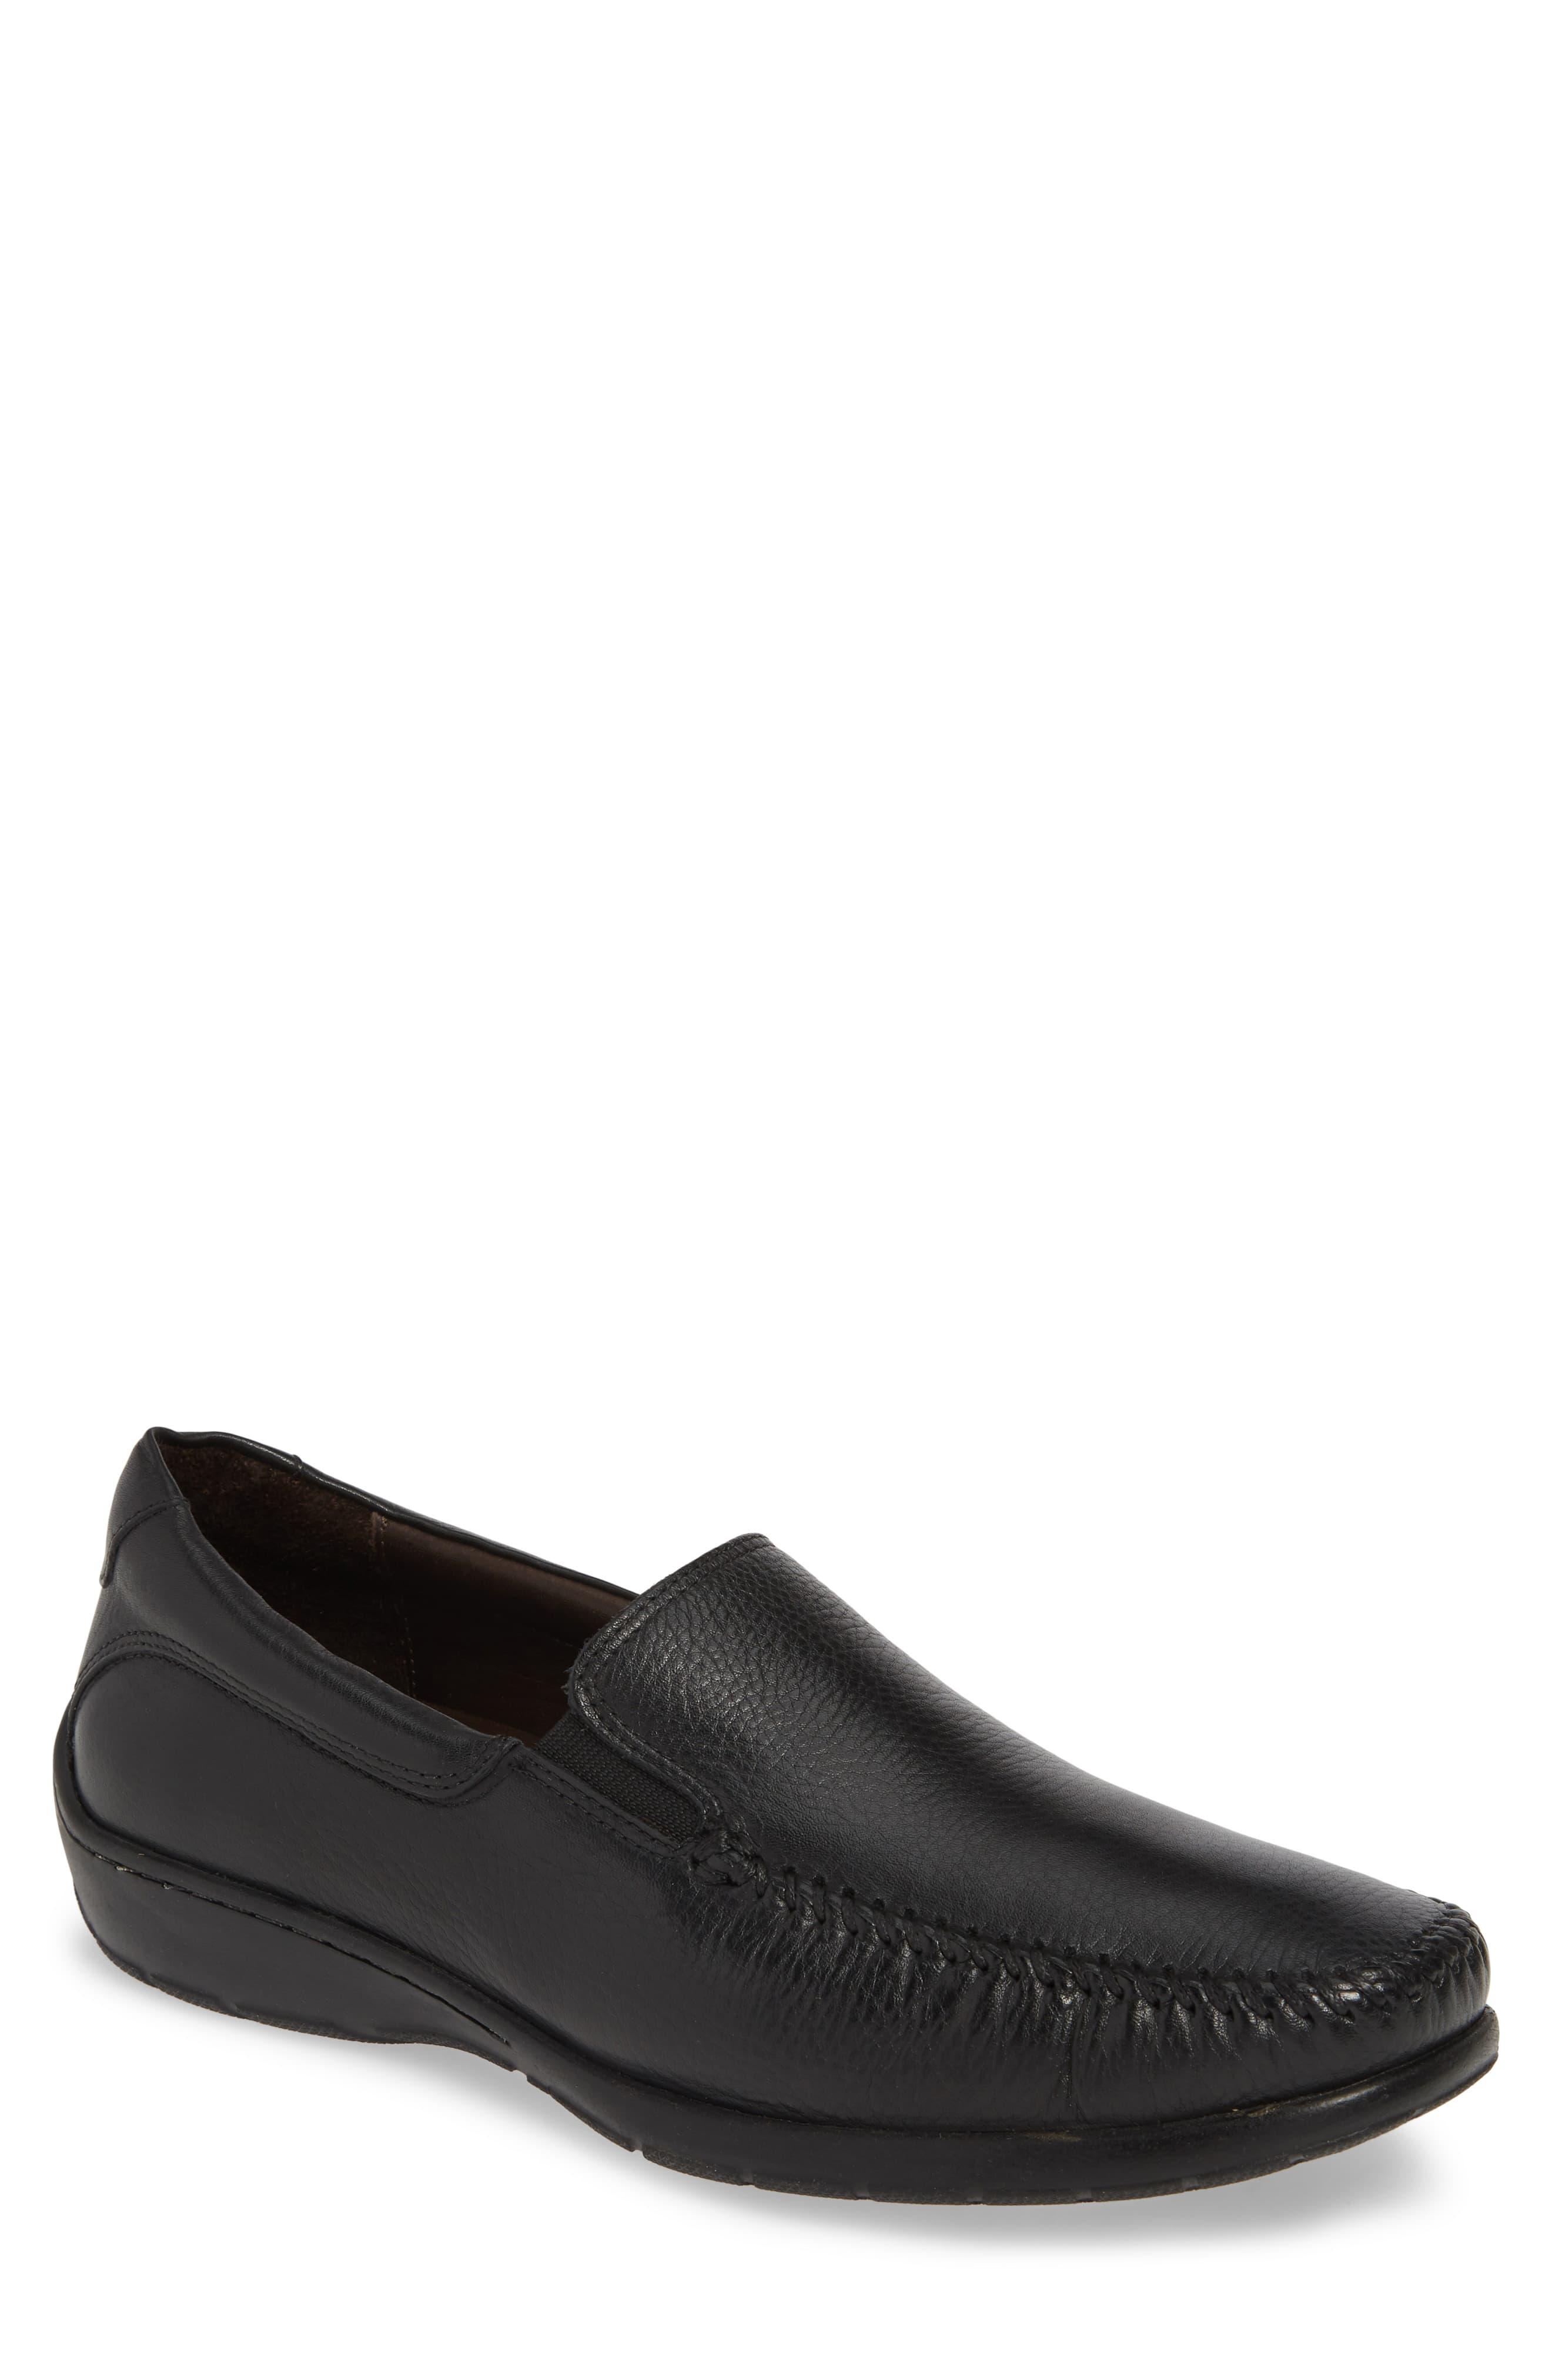 Johnston & Murphy Leather Crawford Venetian Loafer in Black Leather ...